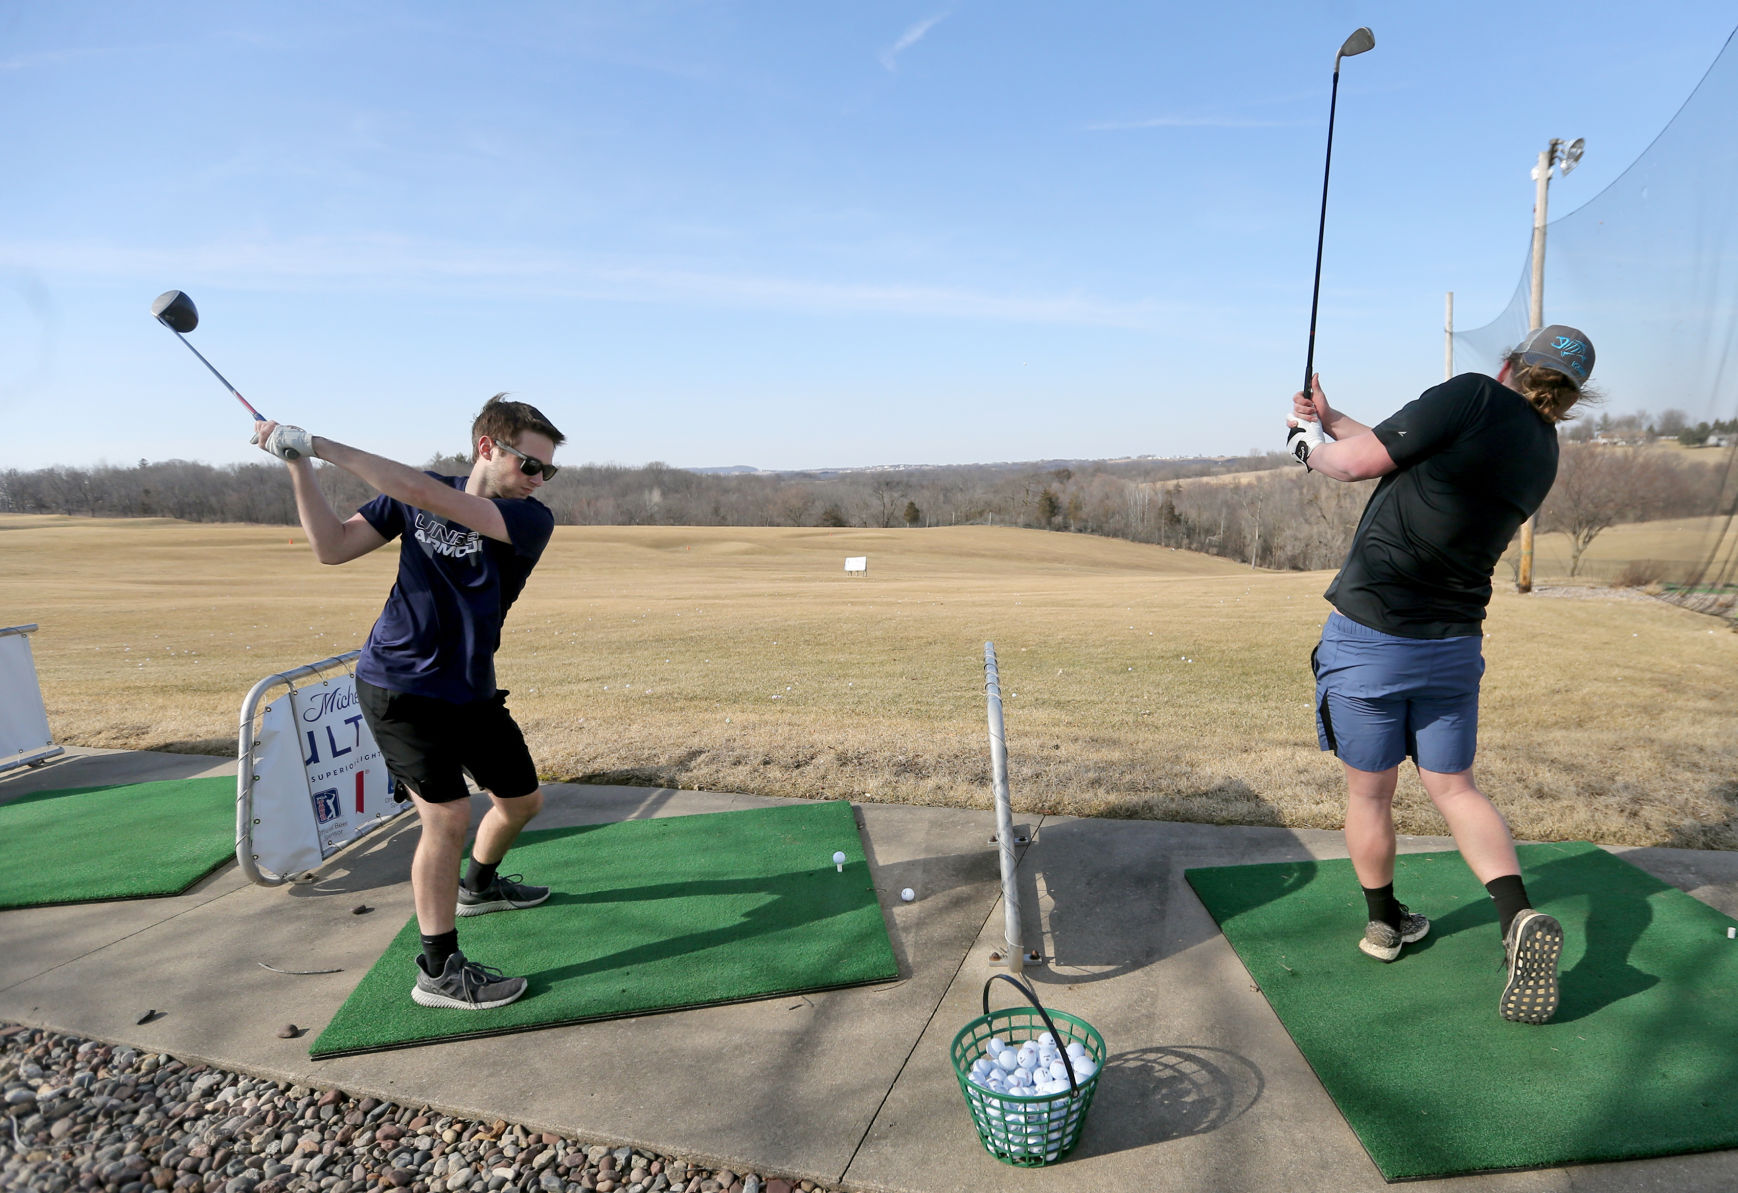 Carson Schiller (left) and Dalton Creighton, both students at University of Dubuque, hit balls at Derby Grange Golf & Recreation in Dubuque on Wednesday, March 16, 2022.    PHOTO CREDIT: JESSICA REILLY